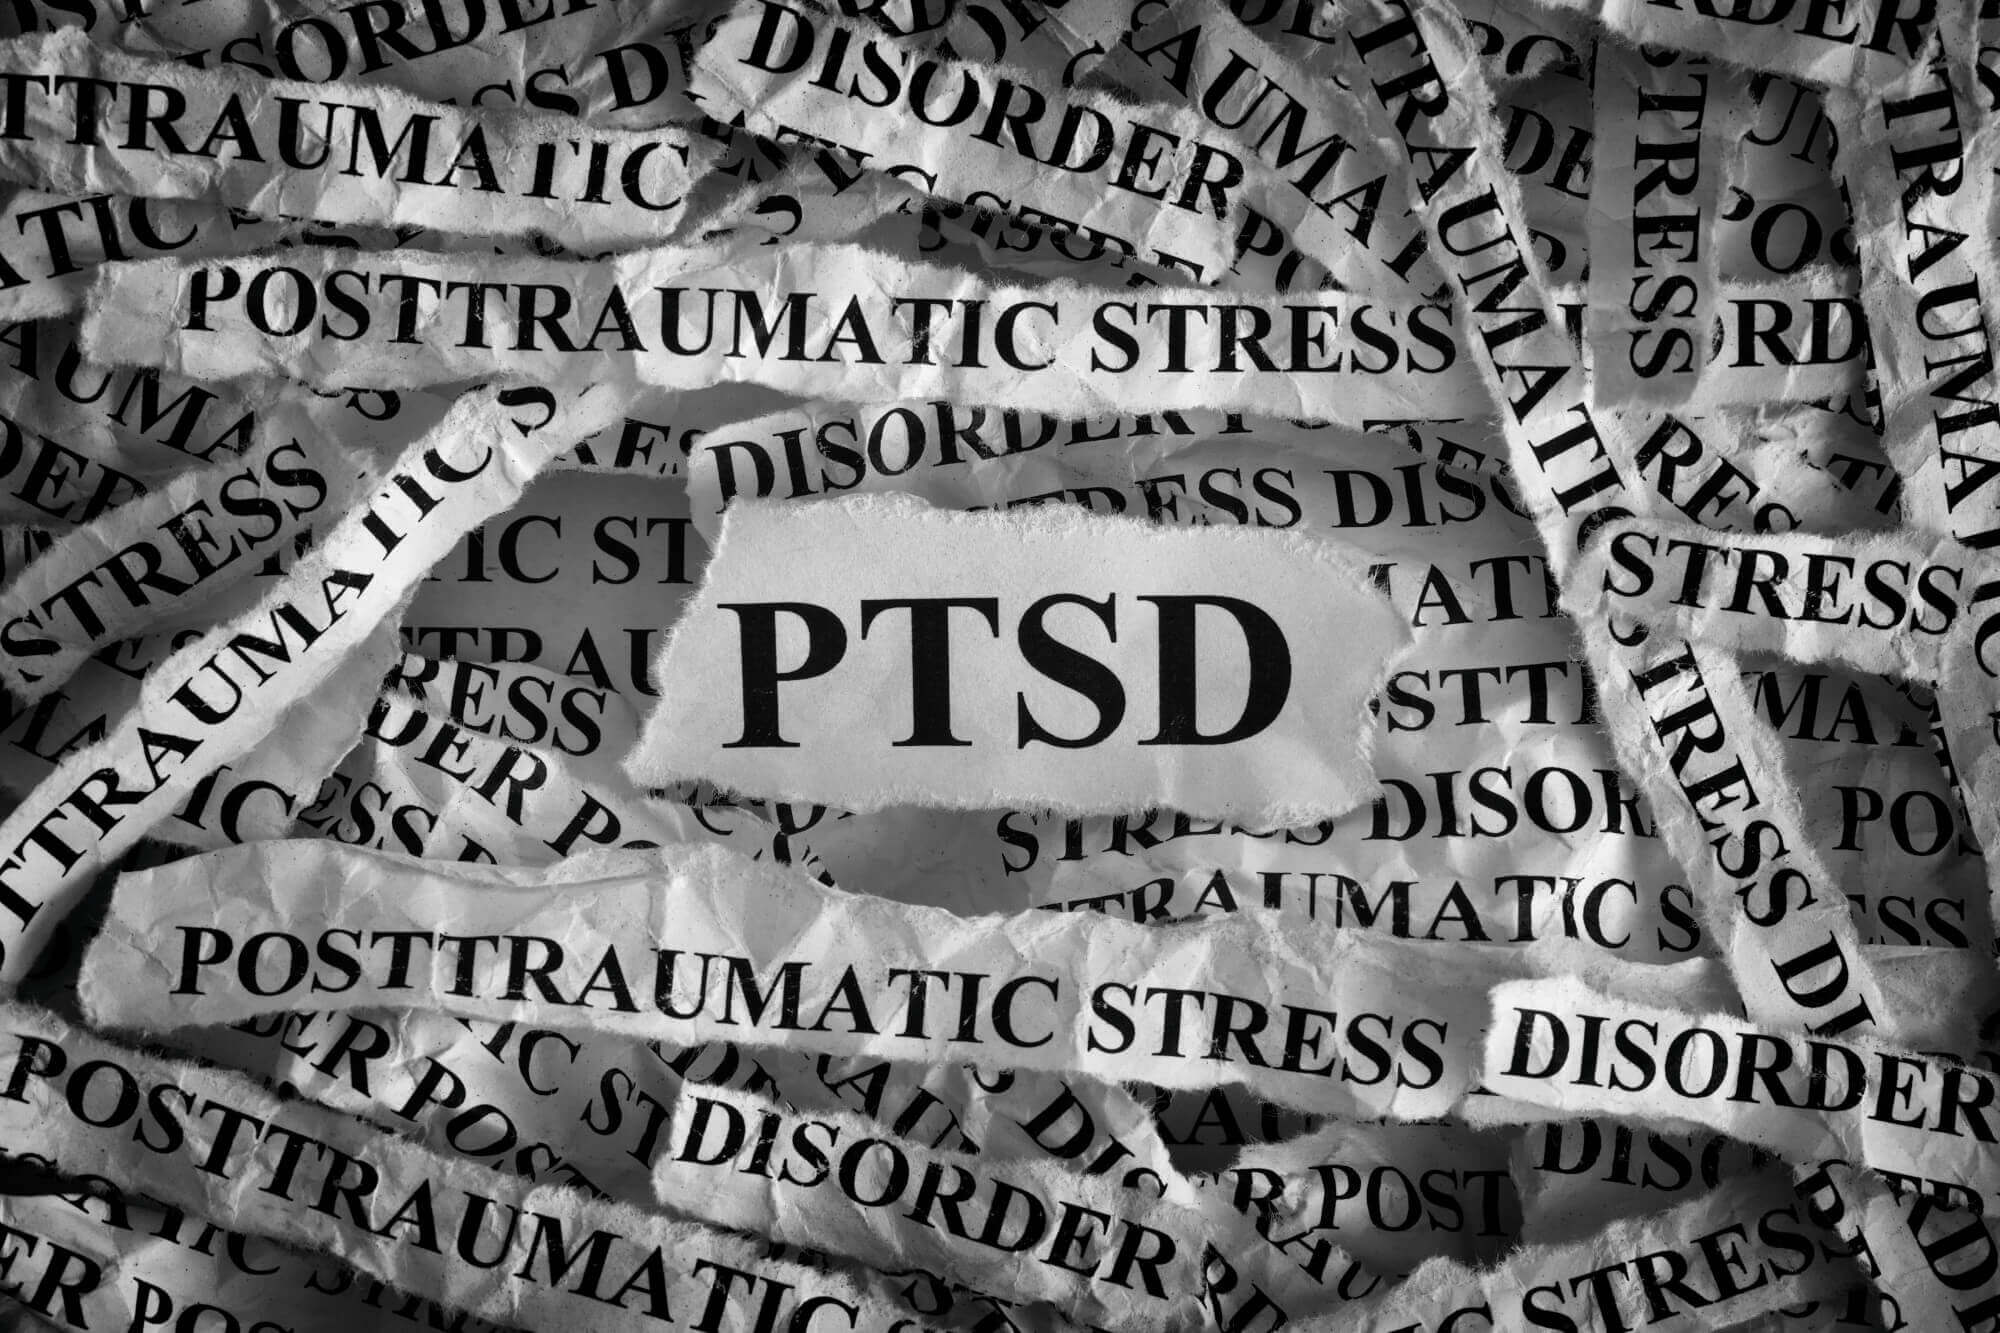 How to Cope with PTSD Triggers - Practical Tips for Everyday Life